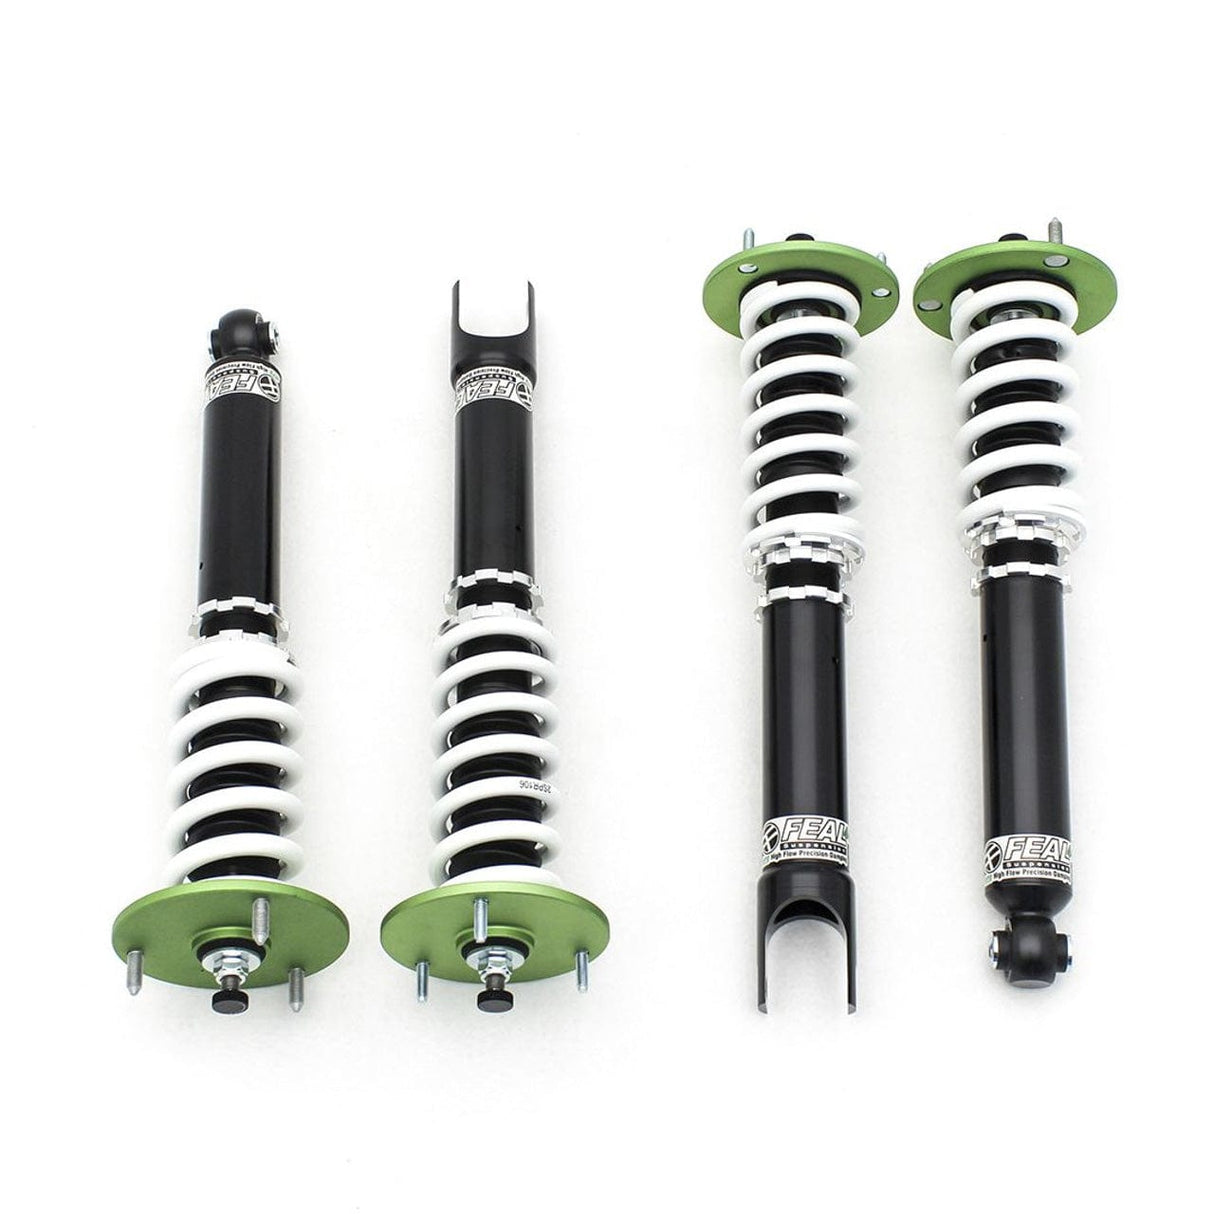 Feal 441 Coilovers - 1996-2001 Toyota Chaser (JZX100)